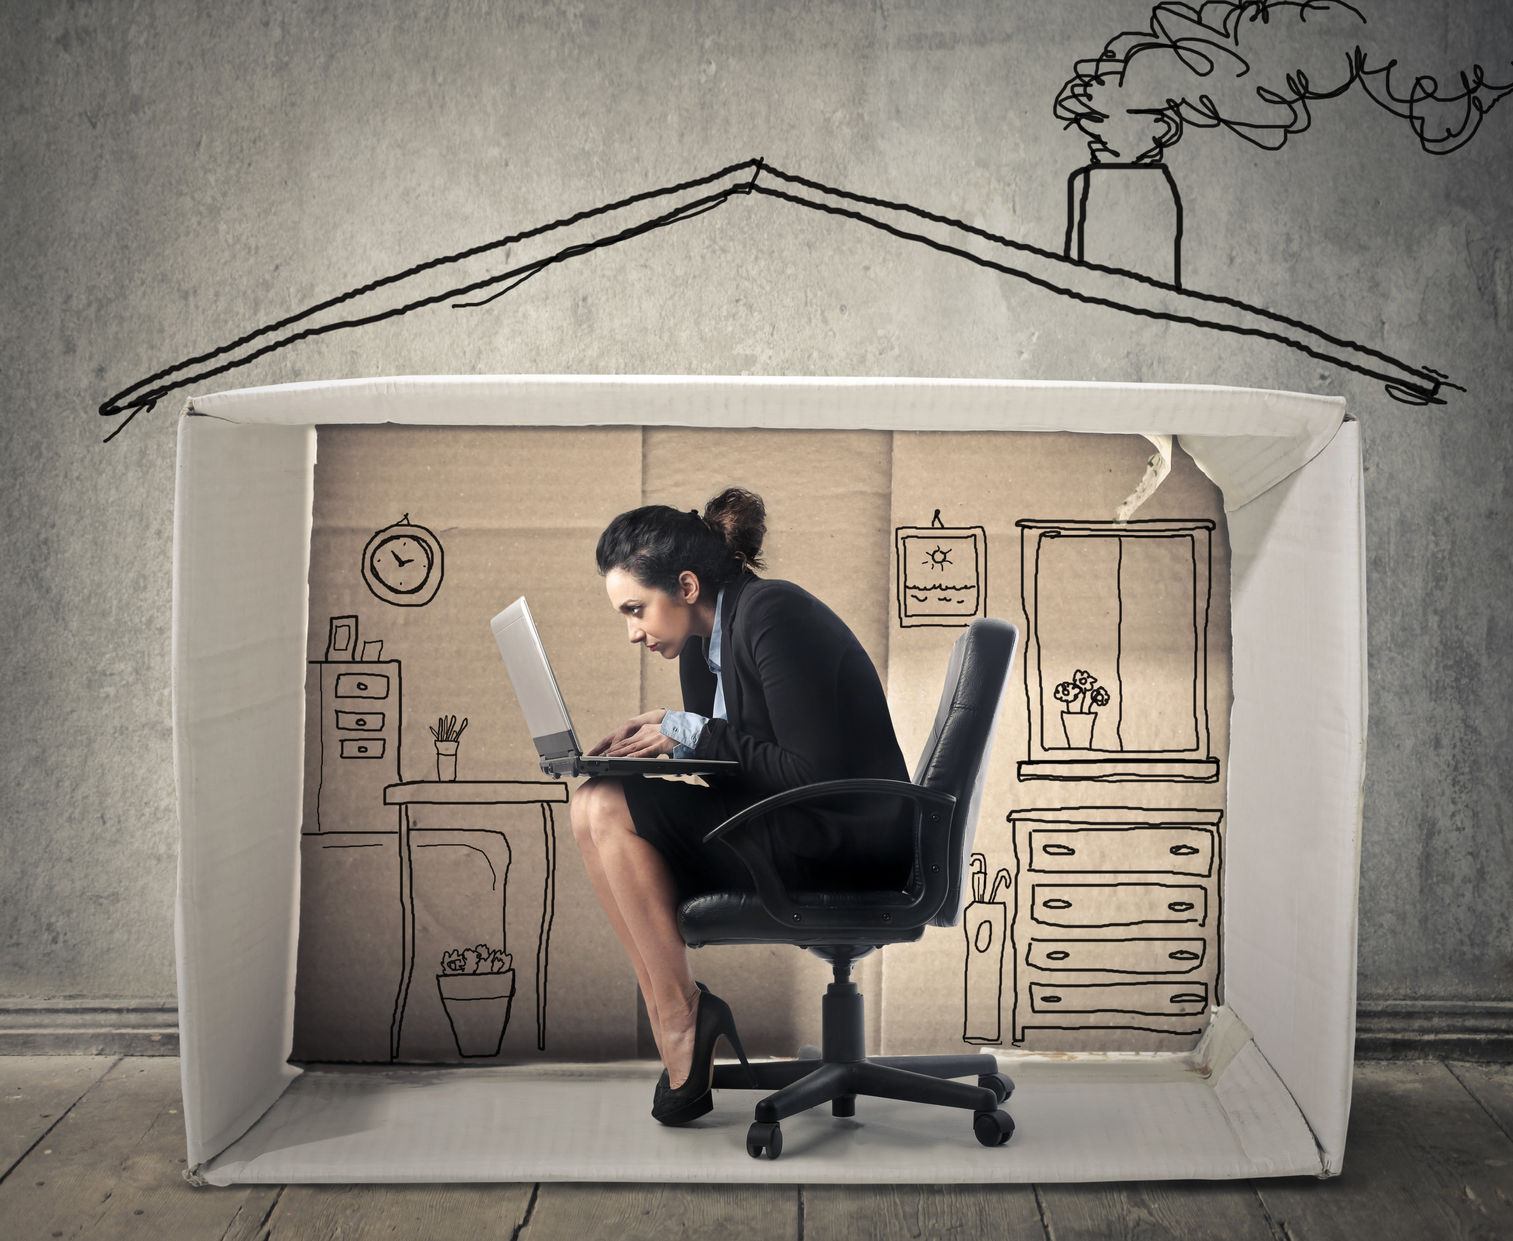 Home office versus rented space – should I stay or should I go?